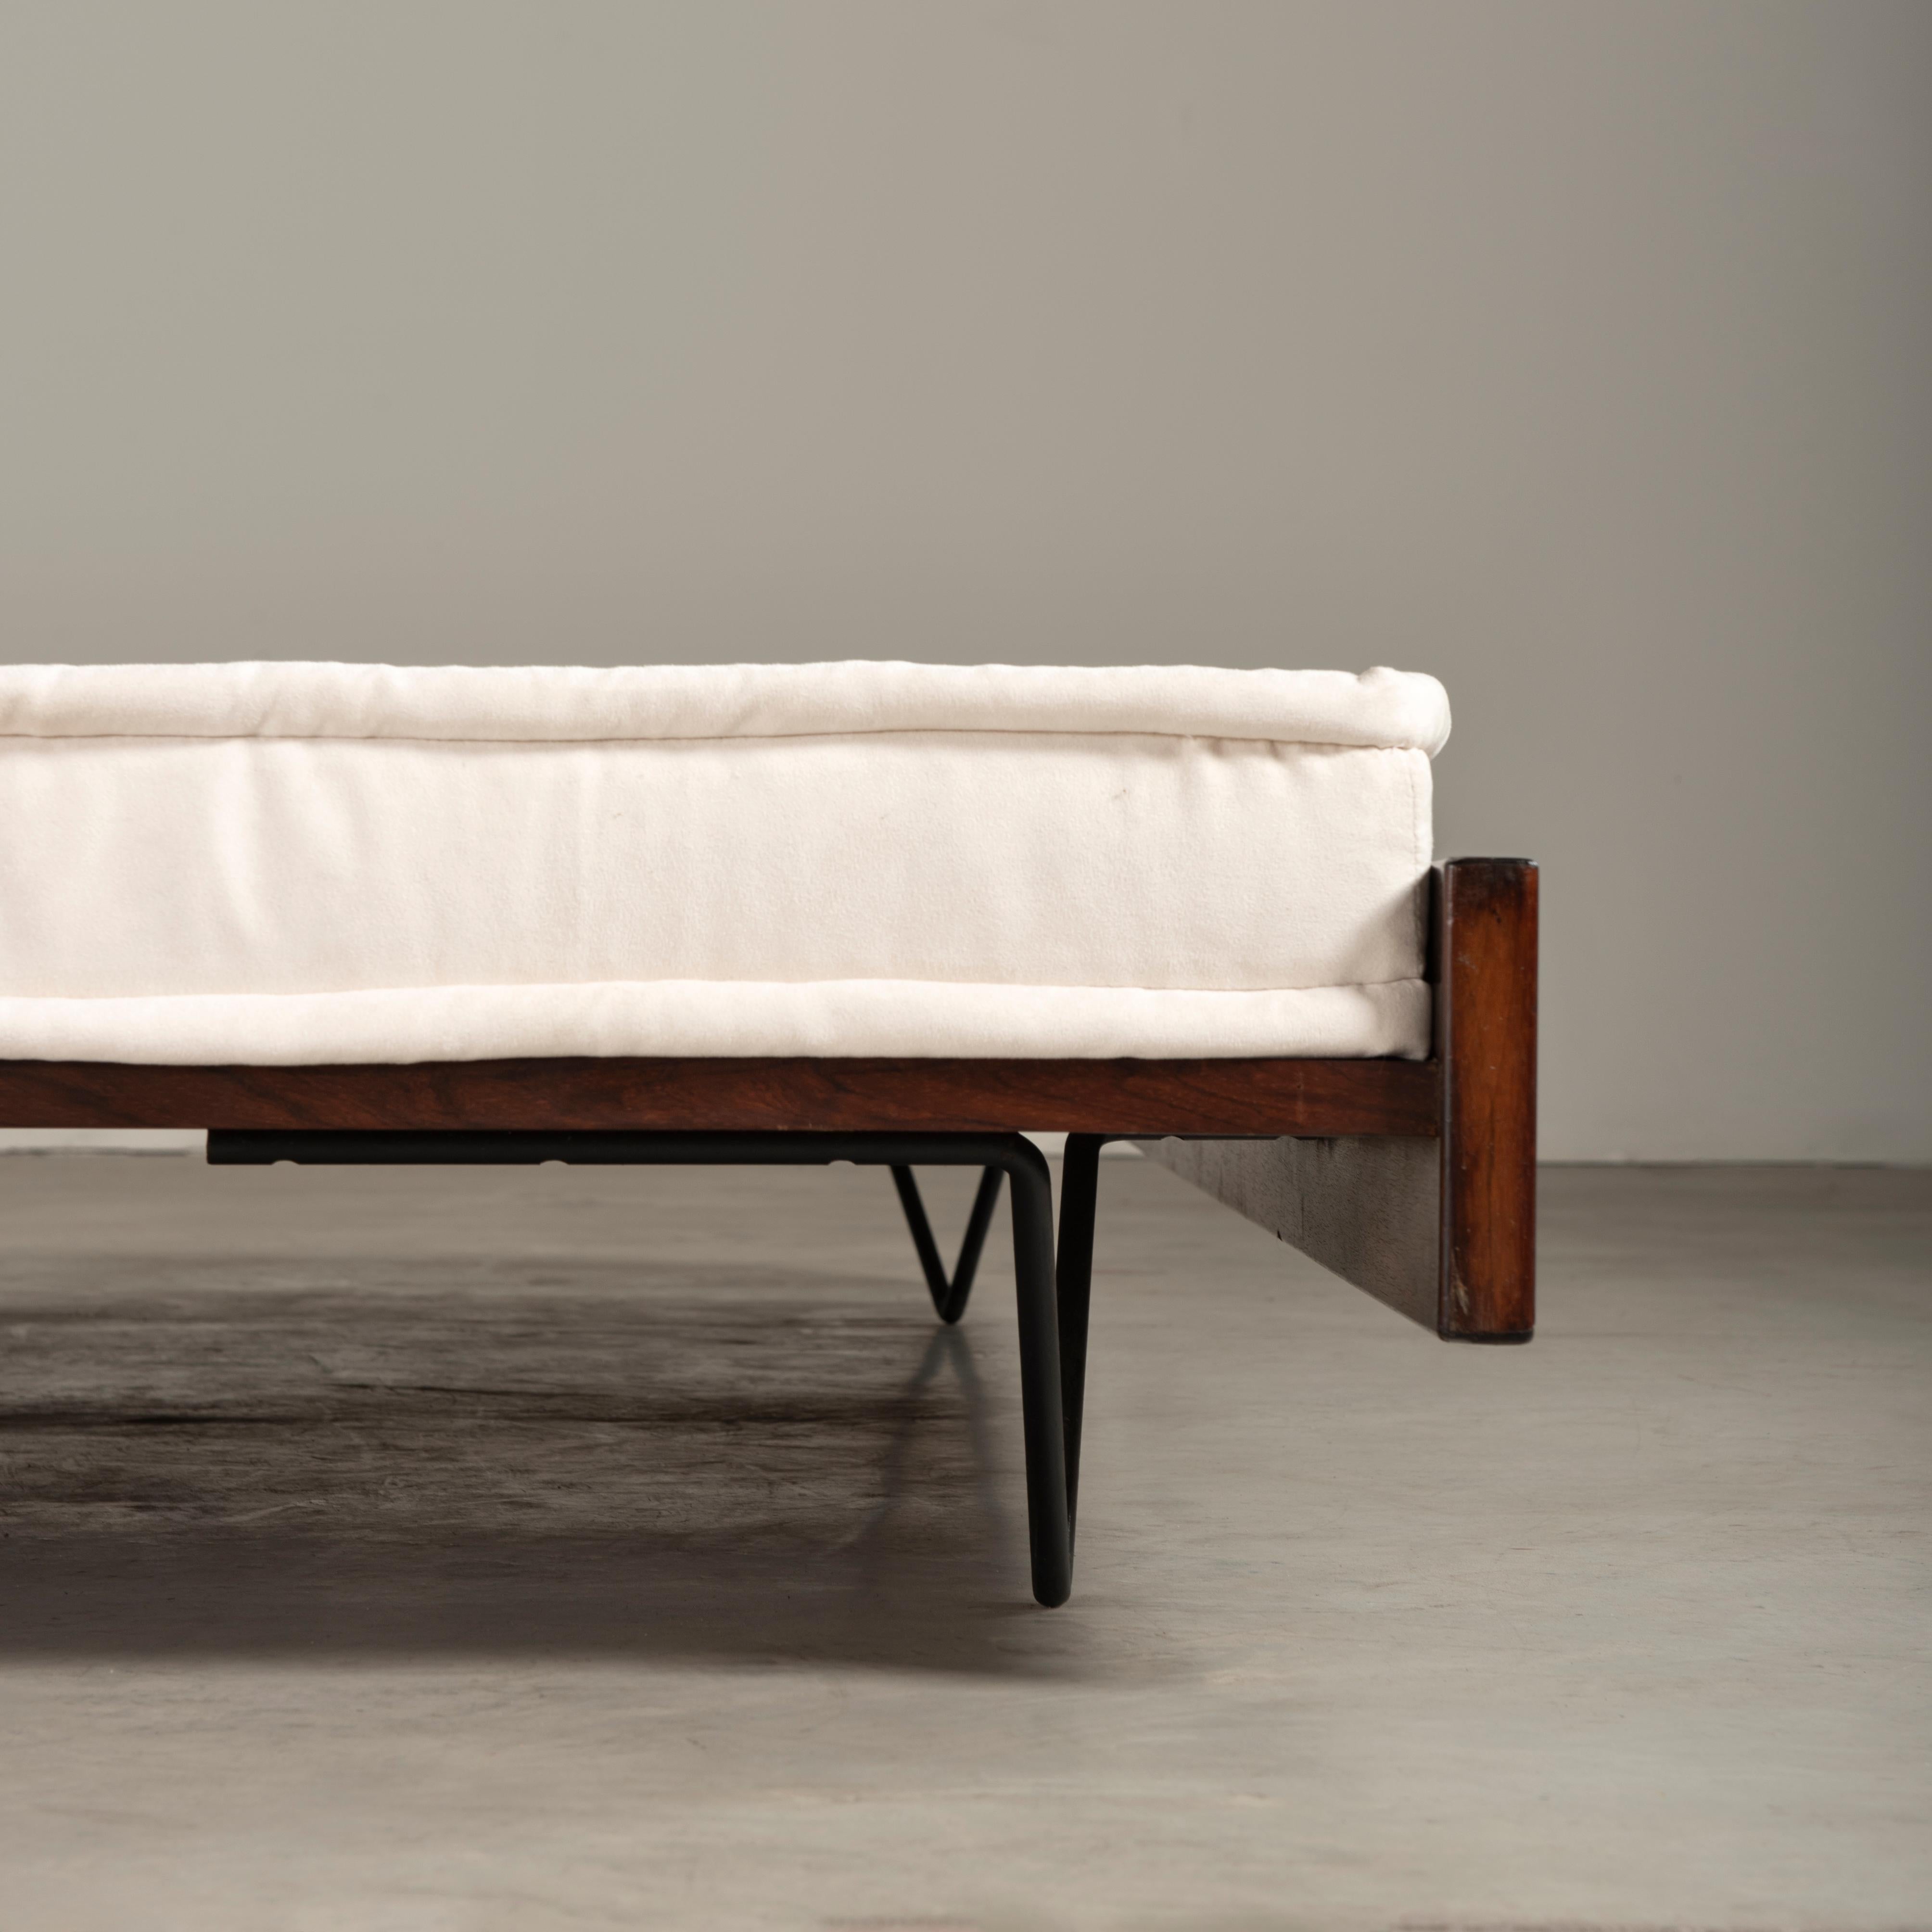 Mid-Century Modern Daybed in Tropical Hardwood and Iron, Jorge Zalszupin, Brazilian Modern Design For Sale